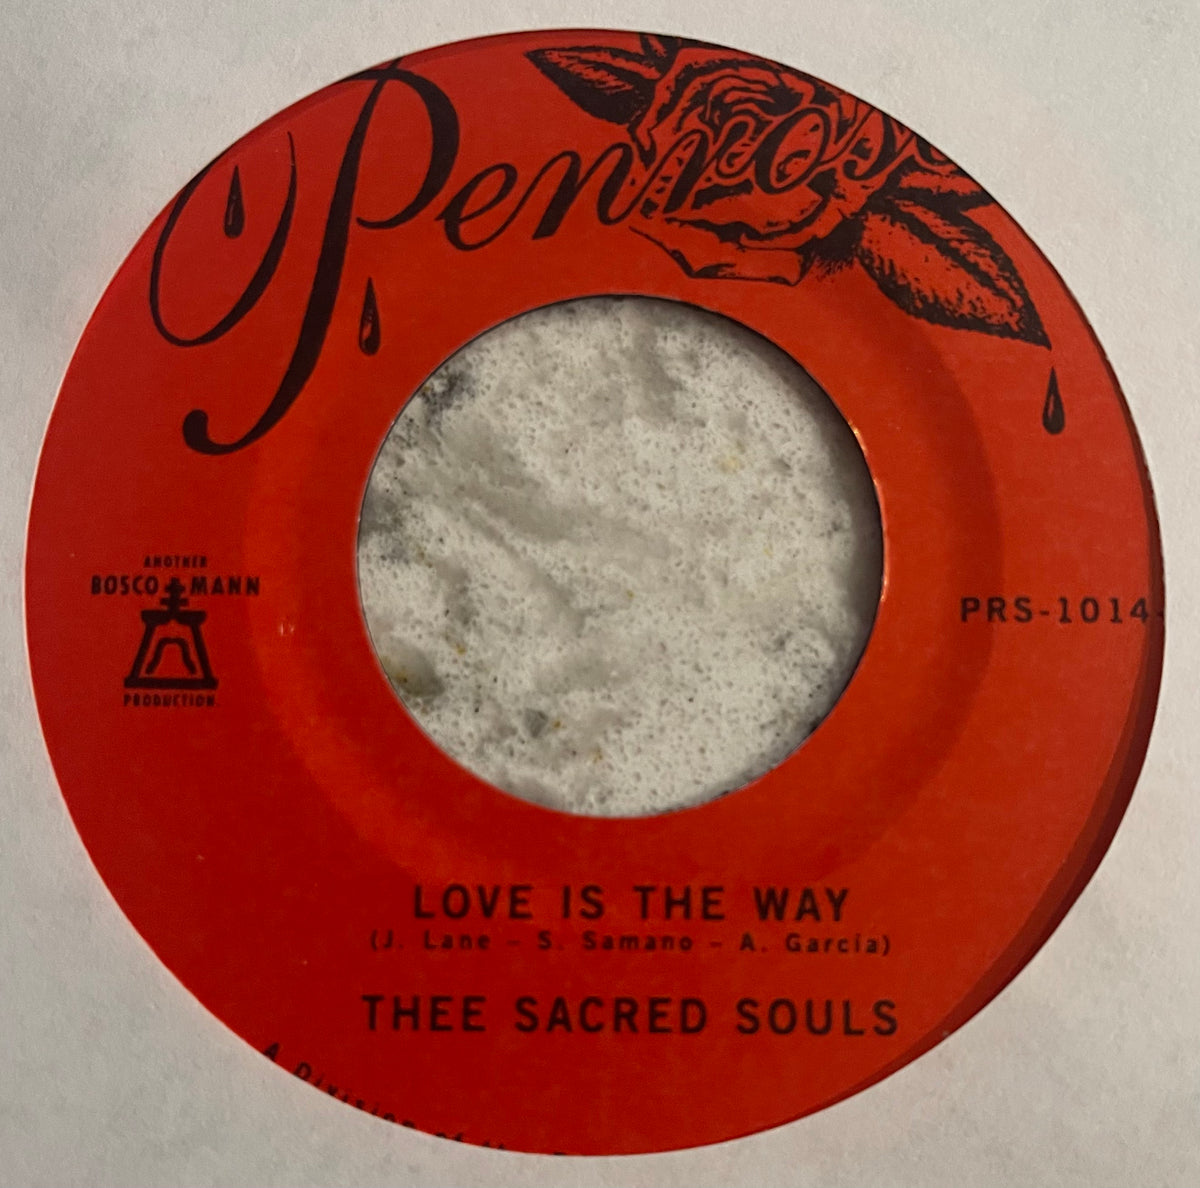 Thee Sacred Souls - Easier Said Than Done b/w Love Is The Way